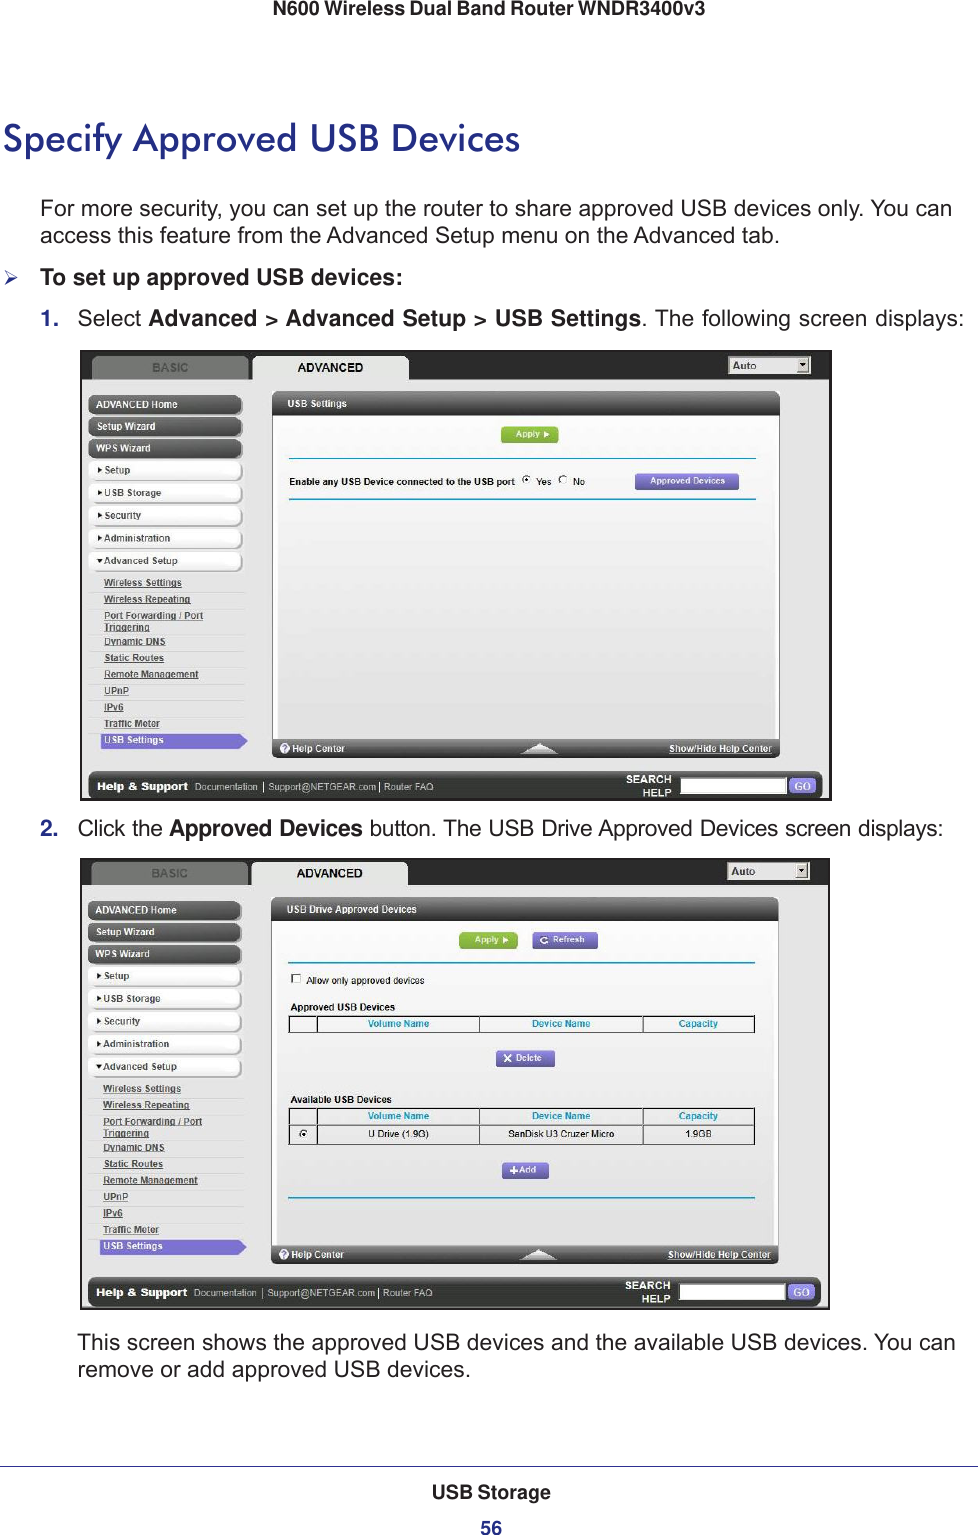 USB Storage56N600 Wireless Dual Band Router WNDR3400v3 Specify Approved USB DevicesFor more security, you can set up the router to share approved USB devices only. You can access this feature from the Advanced Setup menu on the Advanced tab.To set up approved USB devices:1.  Select Advanced &gt; Advanced Setup &gt; USB Settings. The following screen displays:2.  Click the Approved Devices button. The USB Drive Approved Devices screen displays:This screen shows the approved USB devices and the available USB devices. You can remove or add approved USB devices.